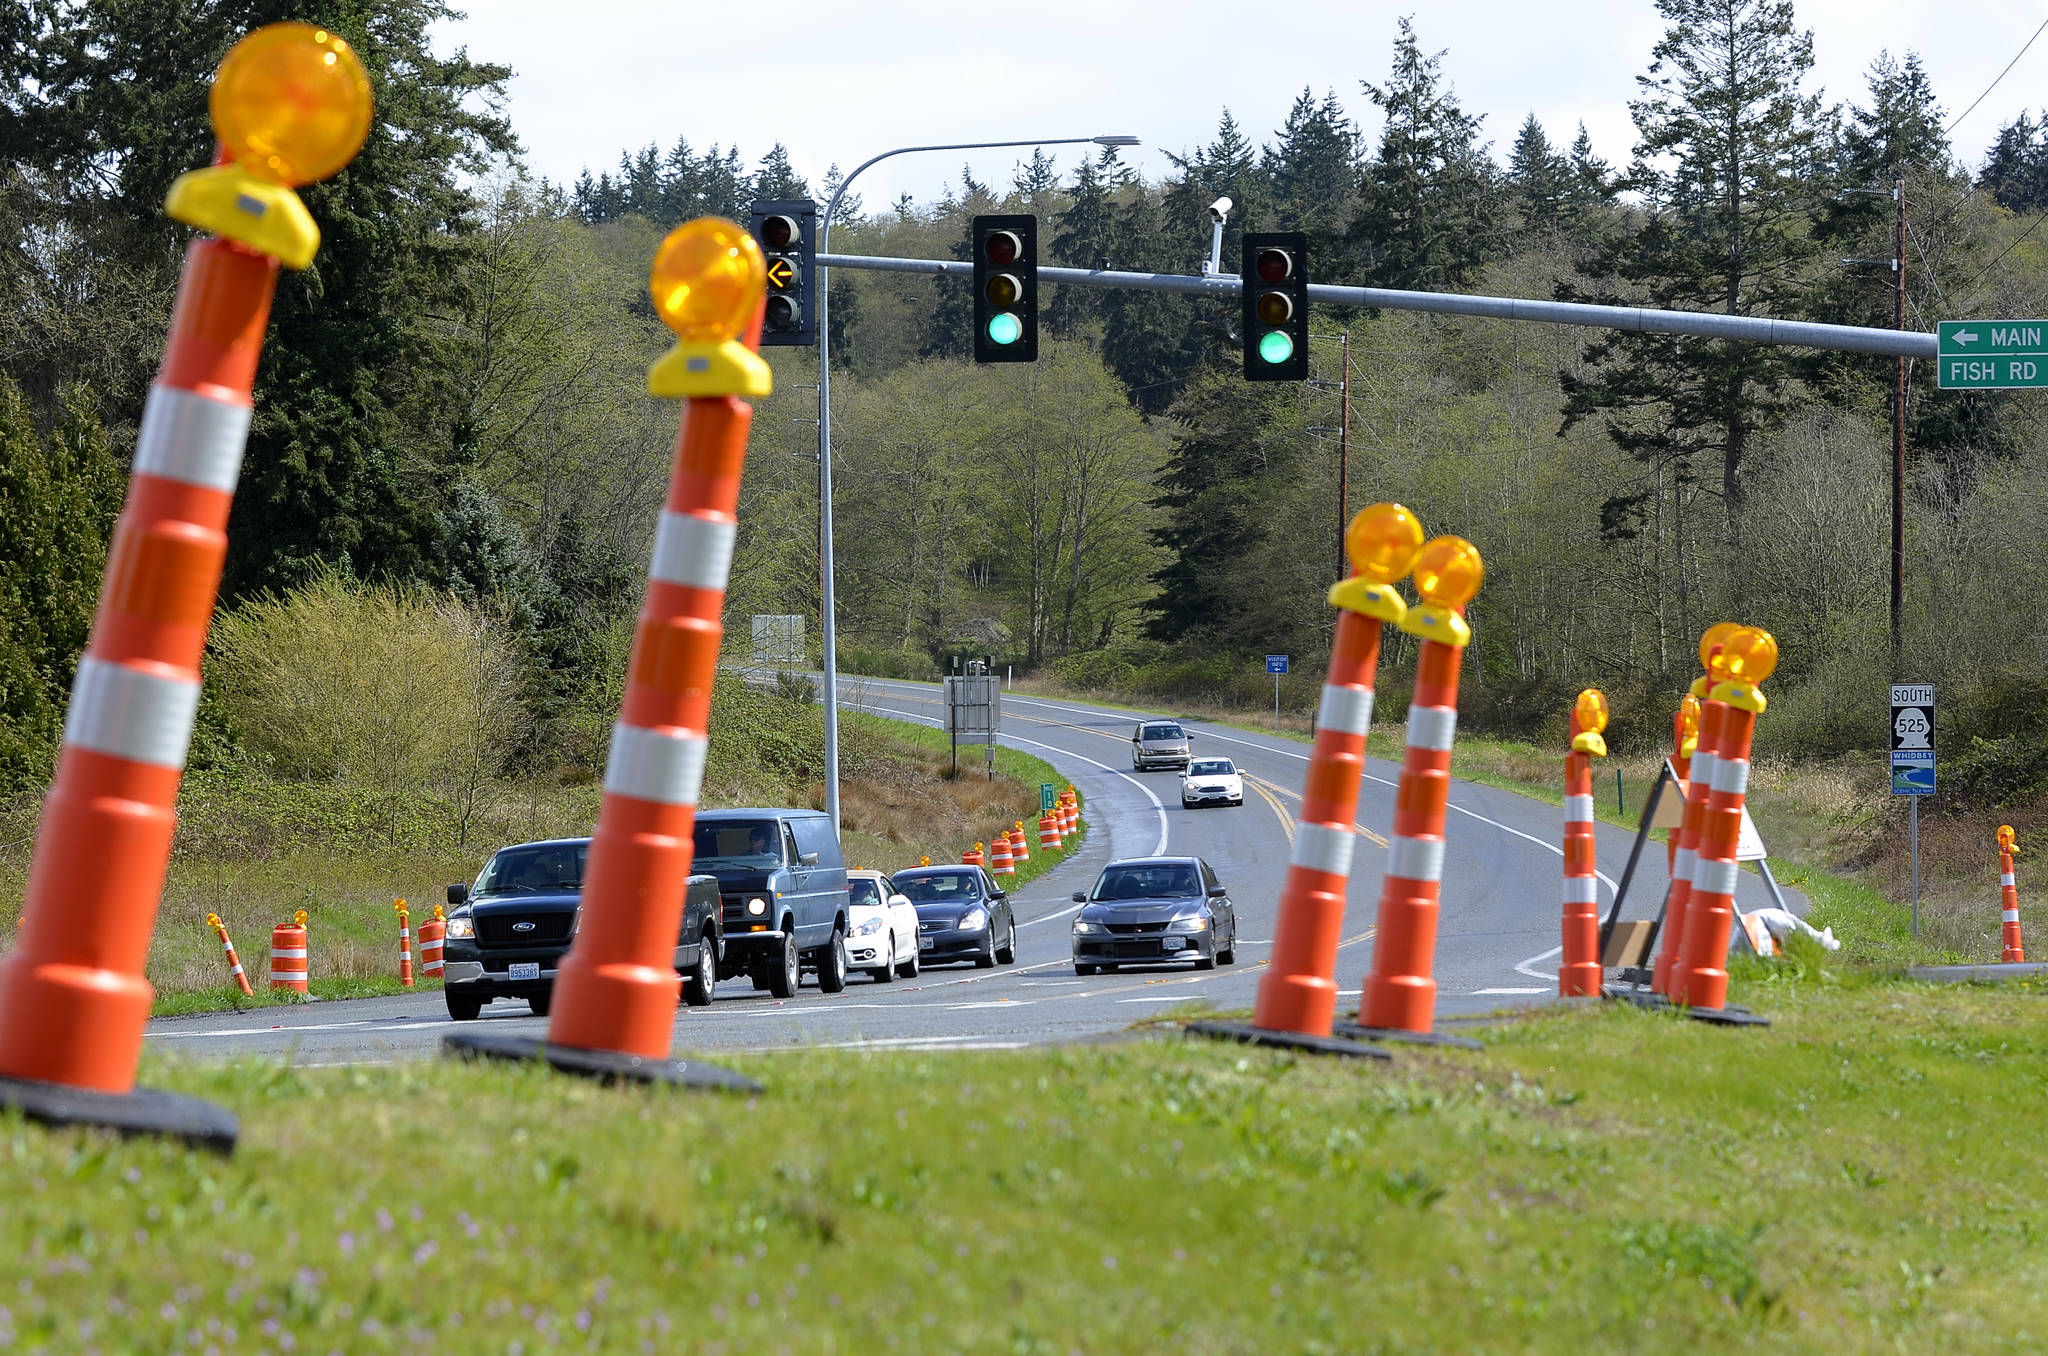 Justin Burnett/The Record                                Road cones and traffic cameras were recent put up at the intersection of Highway 525 and Fish Road in Freeland, along with other places on South Whidbey. The state will repave about 30 miles of the highway from Clinton to Coupeville this summer. Some preliminary work is expected to begin this weekend.